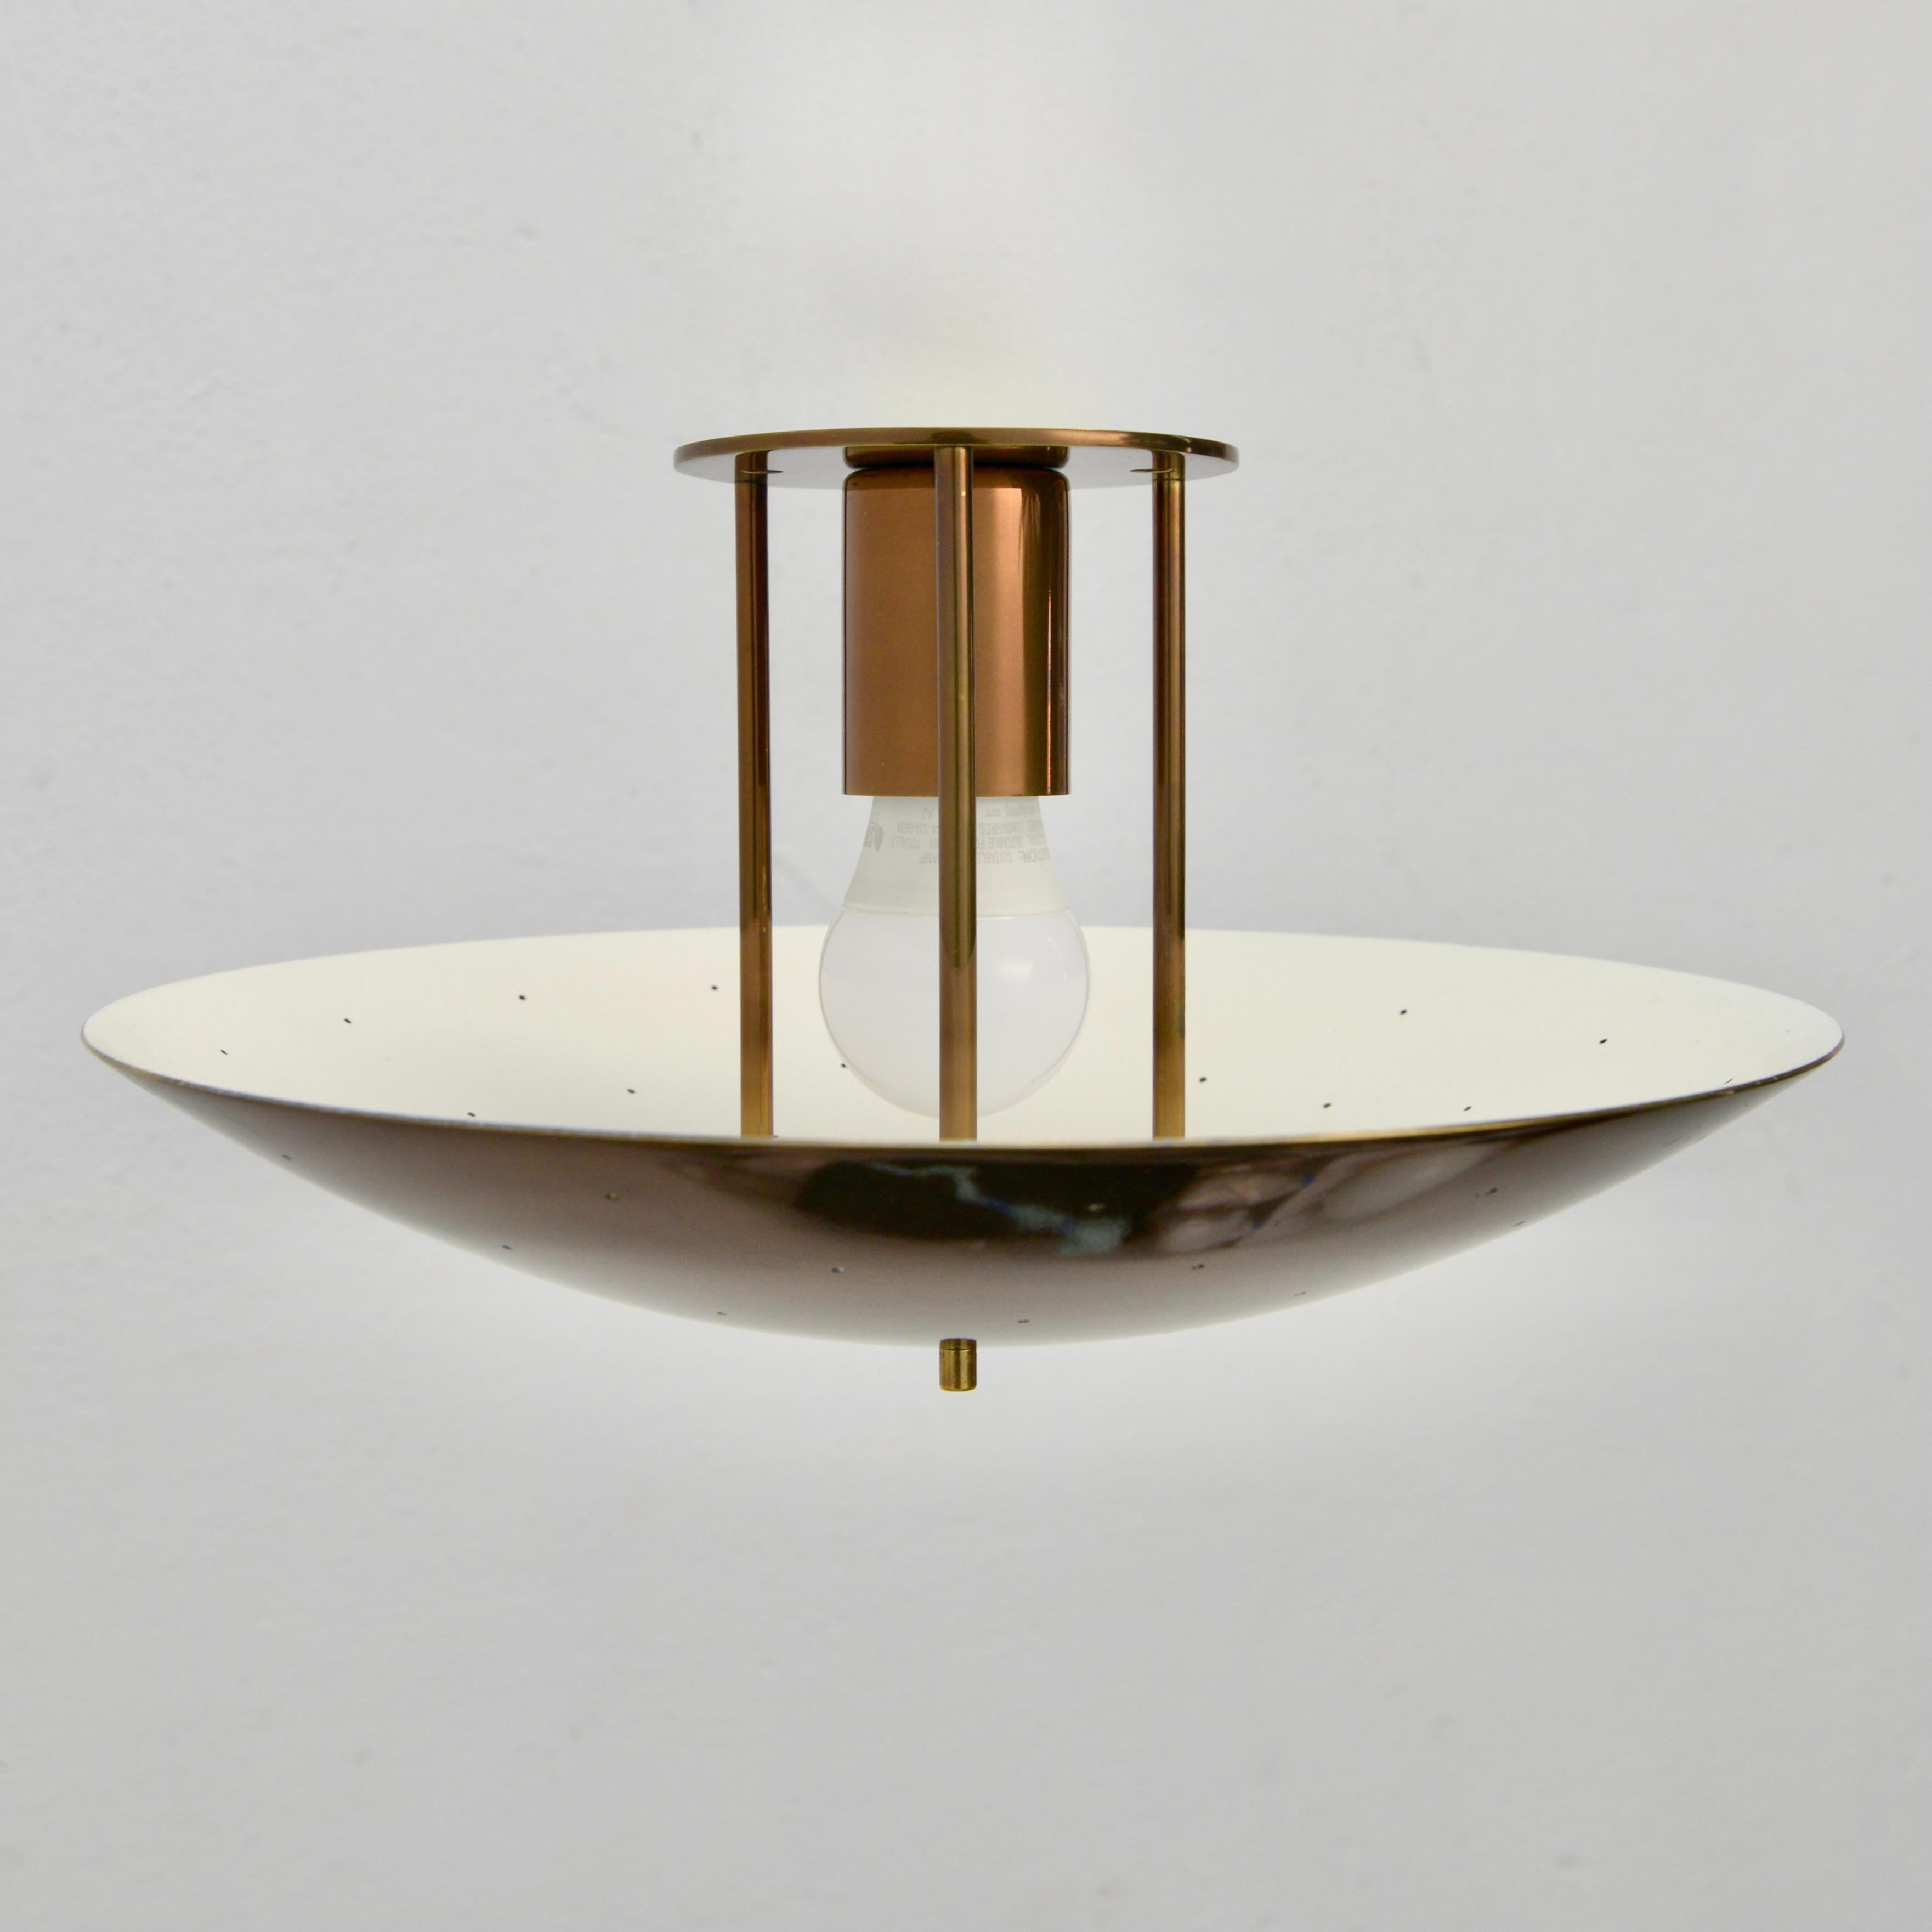 Patinated Petite LUsaucer Brass Fixture by Lumfardo Luminaires For Sale